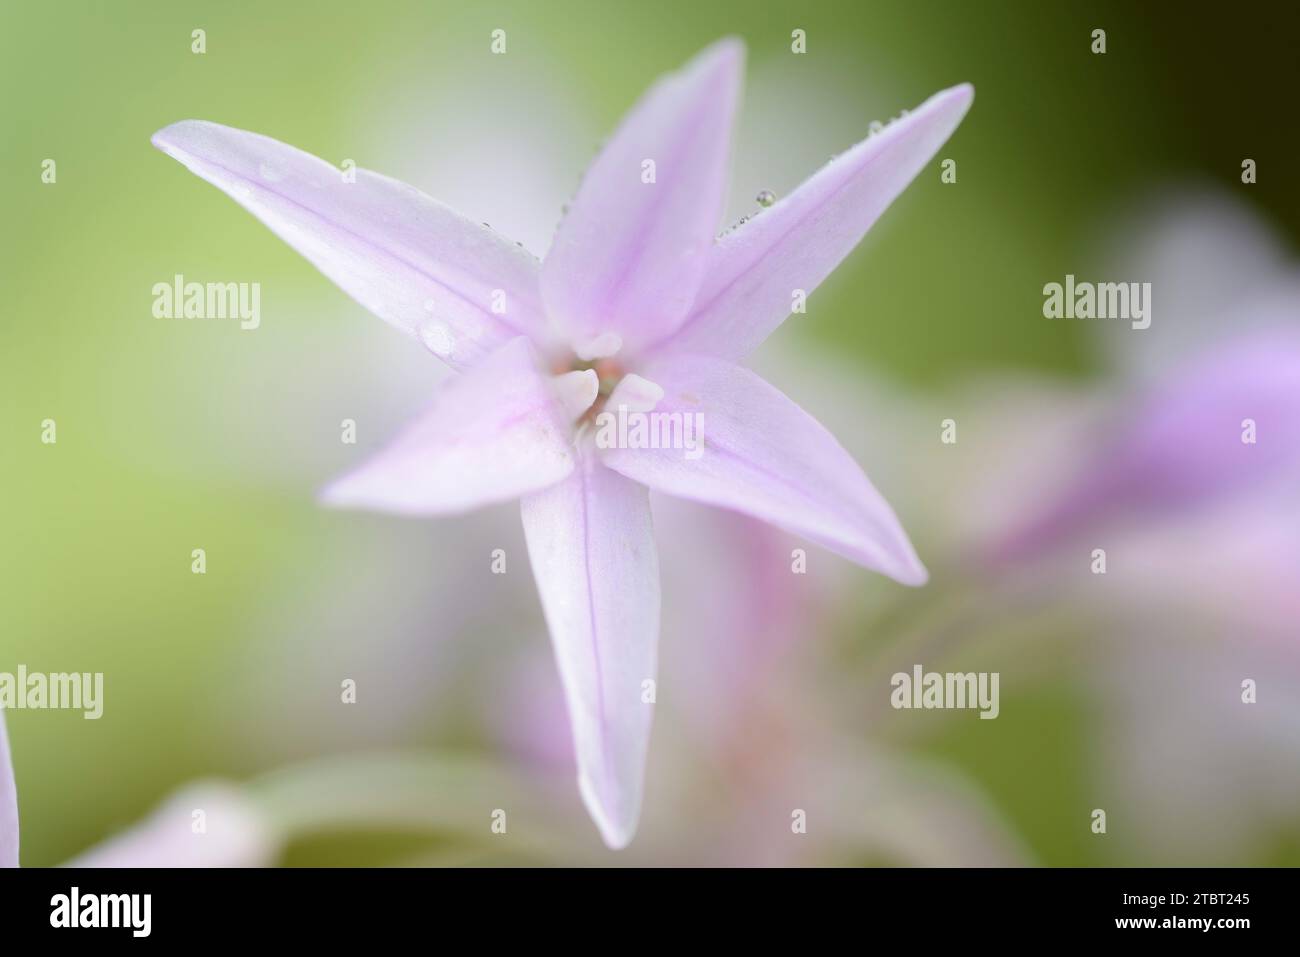 Cape lily (Tulbaghia violacea), flower, occurrence in South Africa Stock Photo